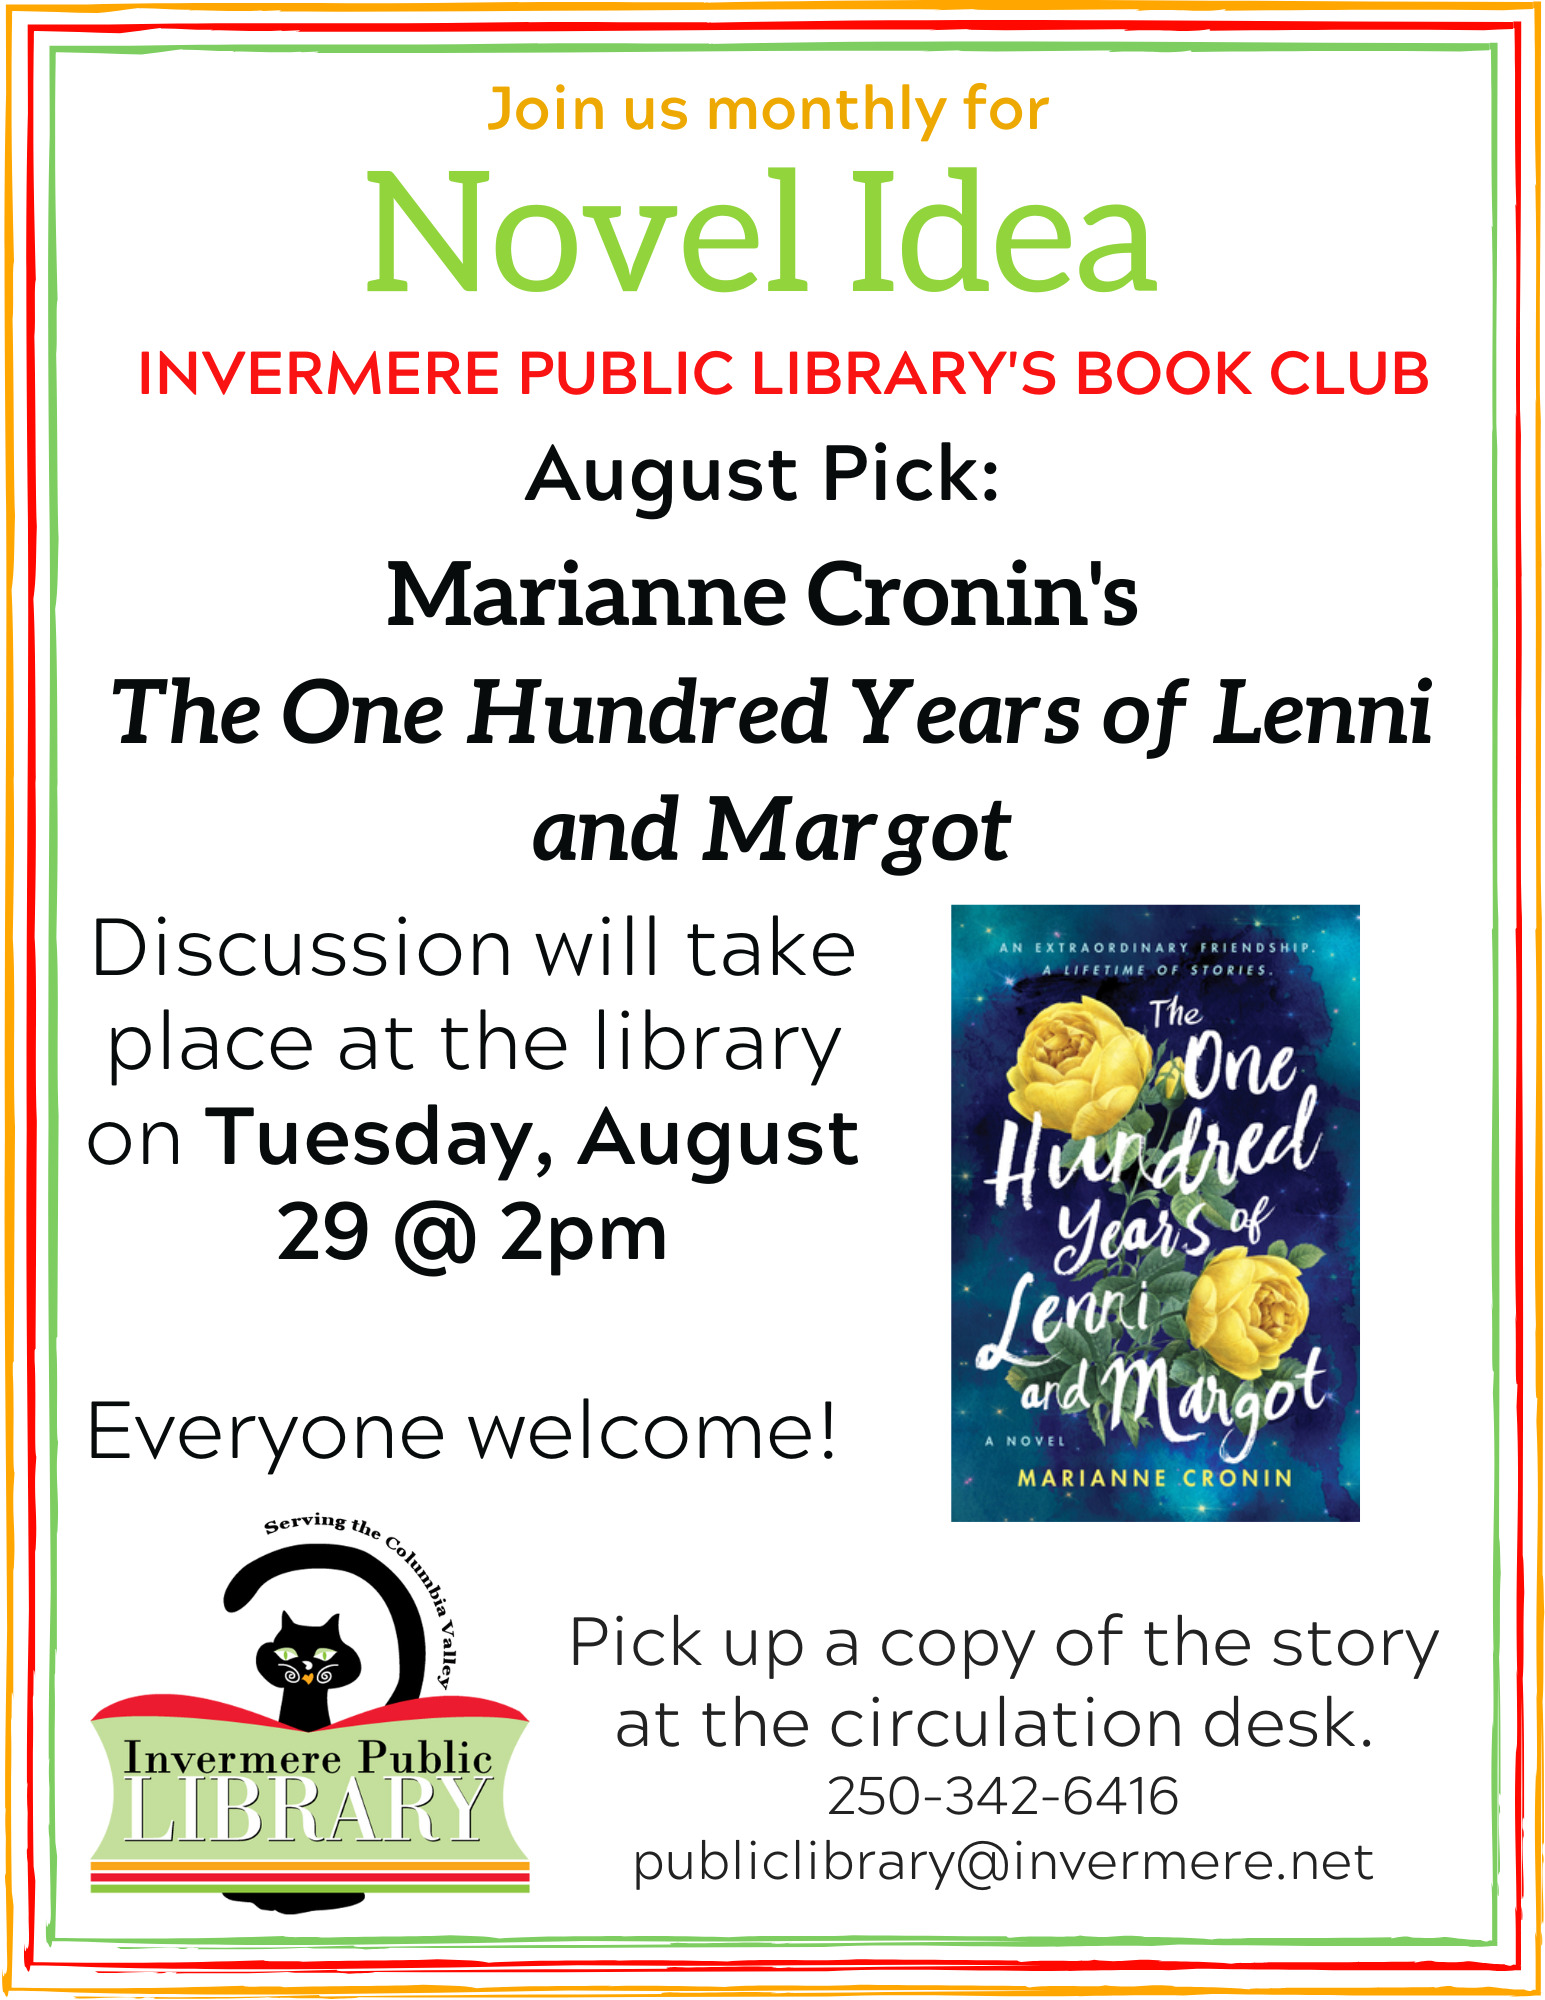 Poster that reads "Join us Monthly for Novel Idea, Invermere Public Library's Book Club. August Pick: Marianne Cronin's The One Hundred Years of Lenni and Margot. Discussion takes place at the library on Tuesday, August 29 at 2pm. Everyone welcome. Pick up a copy of the book at the circulation desk. Image of the book cover on the right side of poster and IPL logo on bottom left.